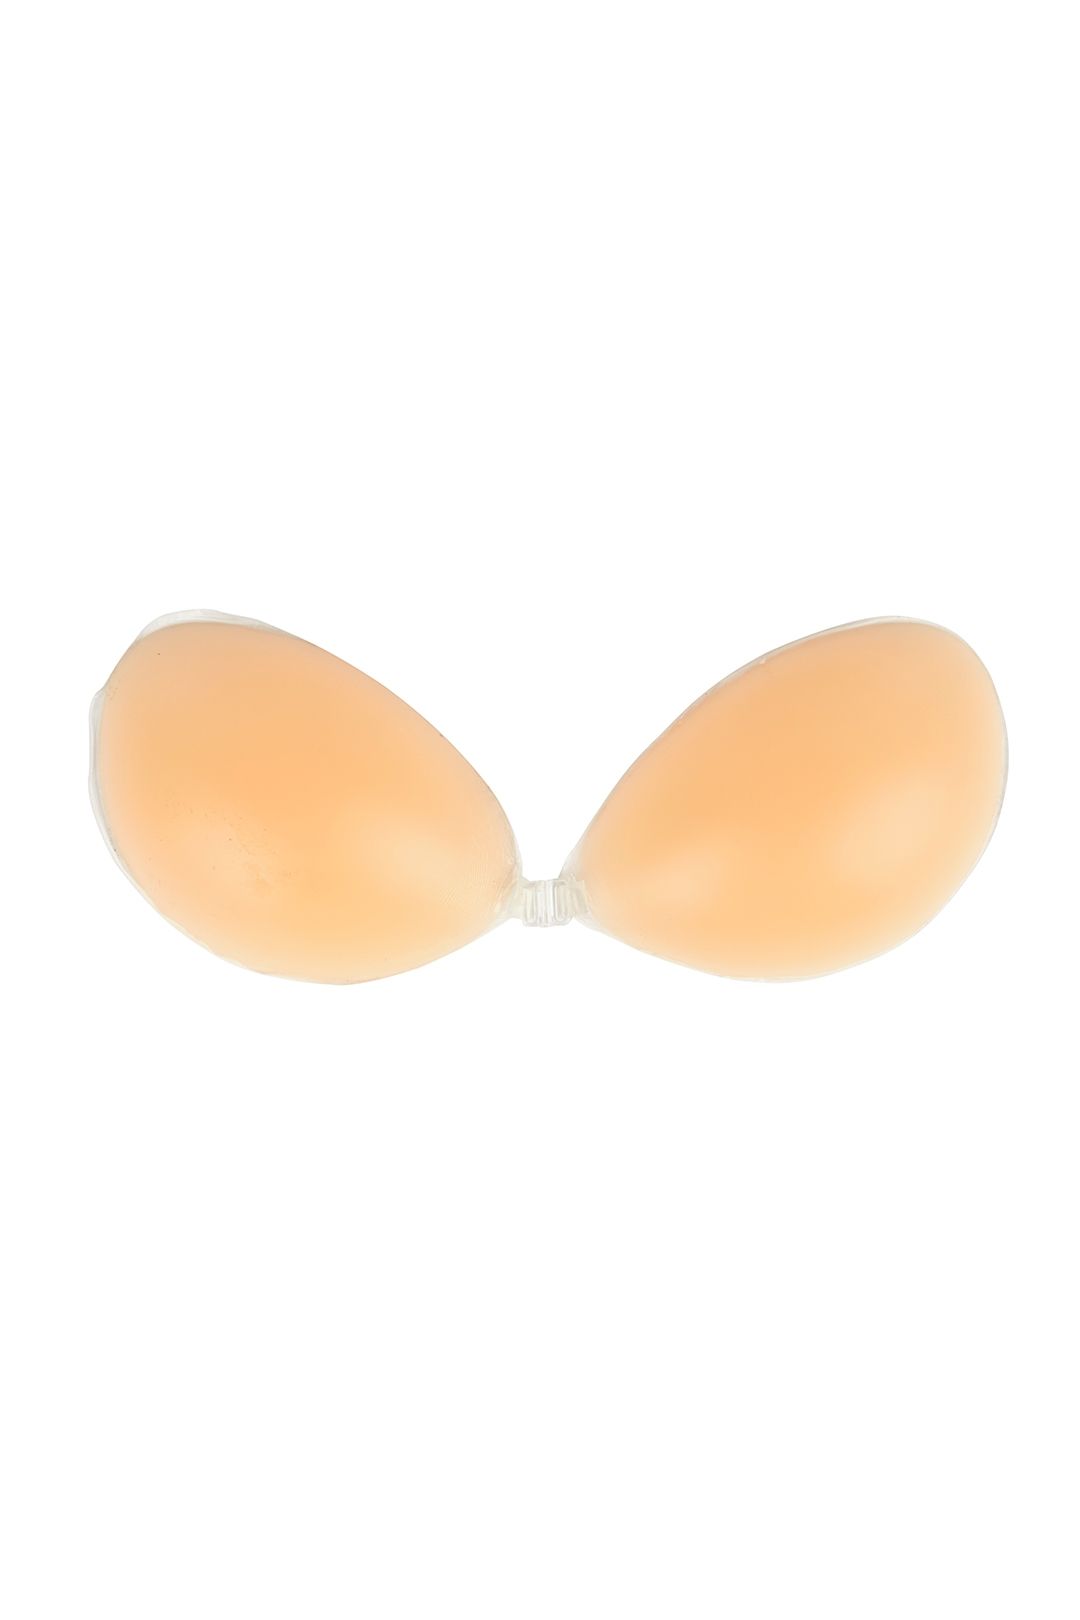 Secret Weapons - Nudi Boobies - Nude - Front Product